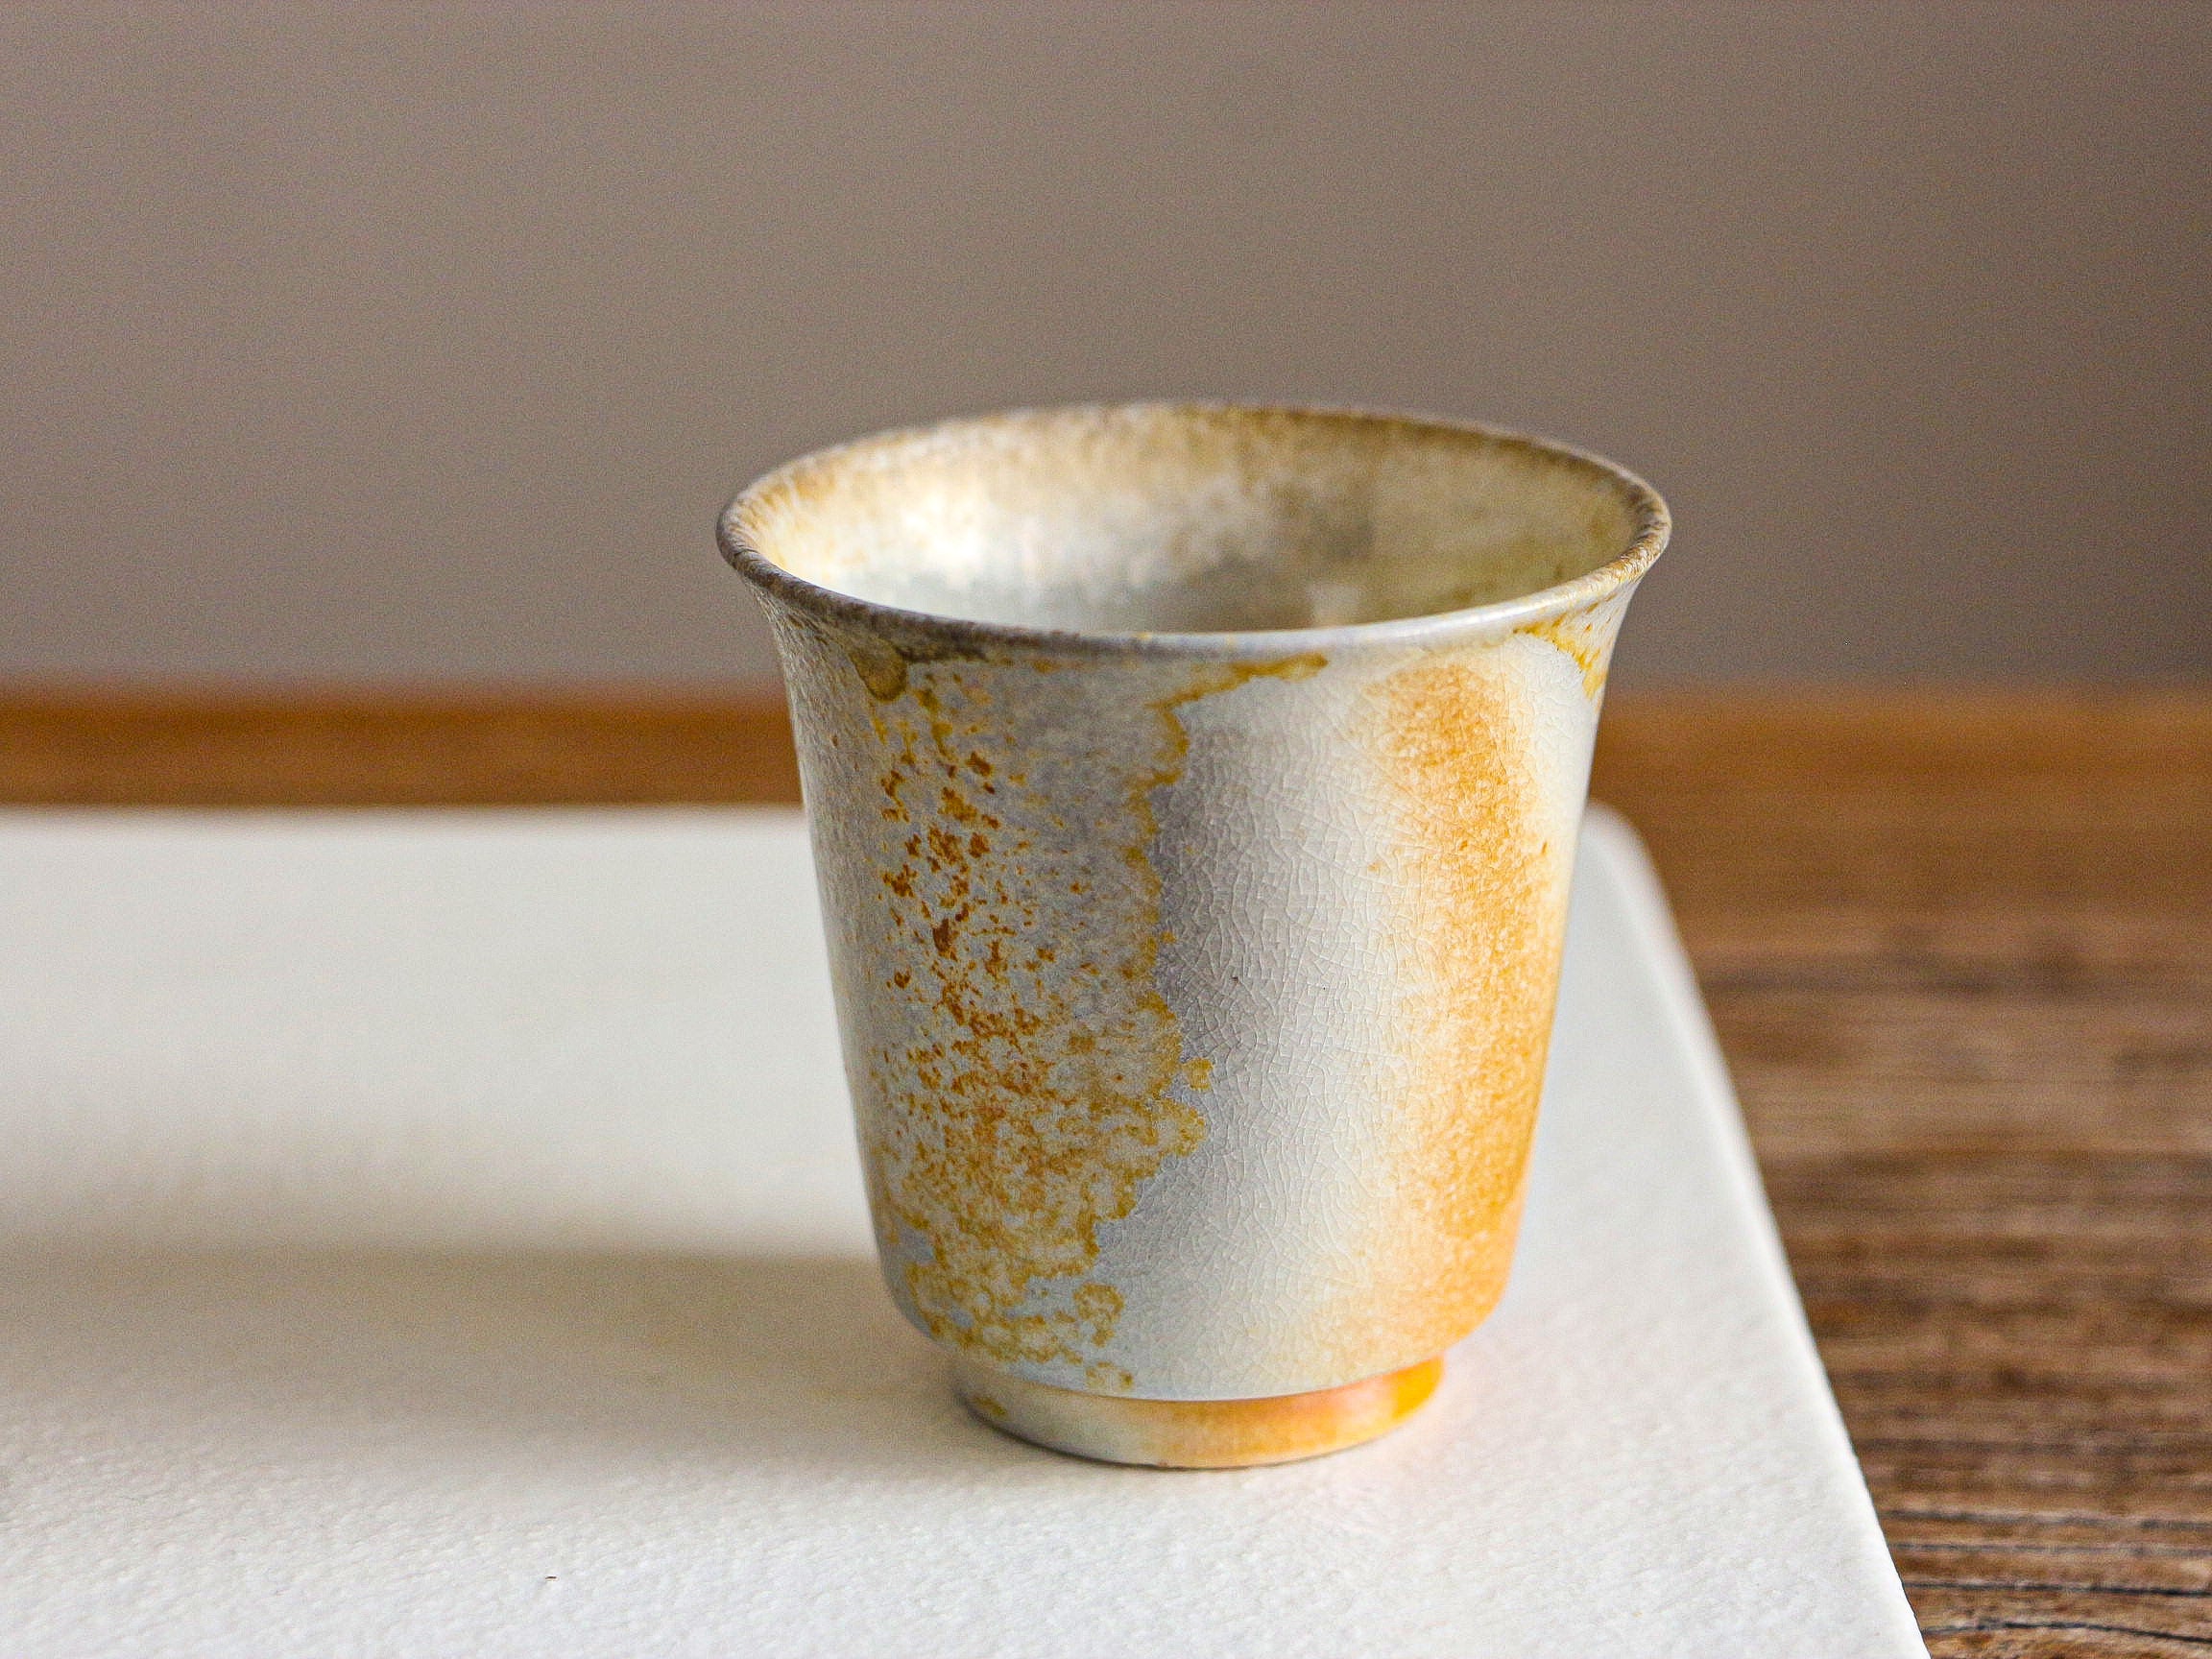 Starry Woodfired Teacup